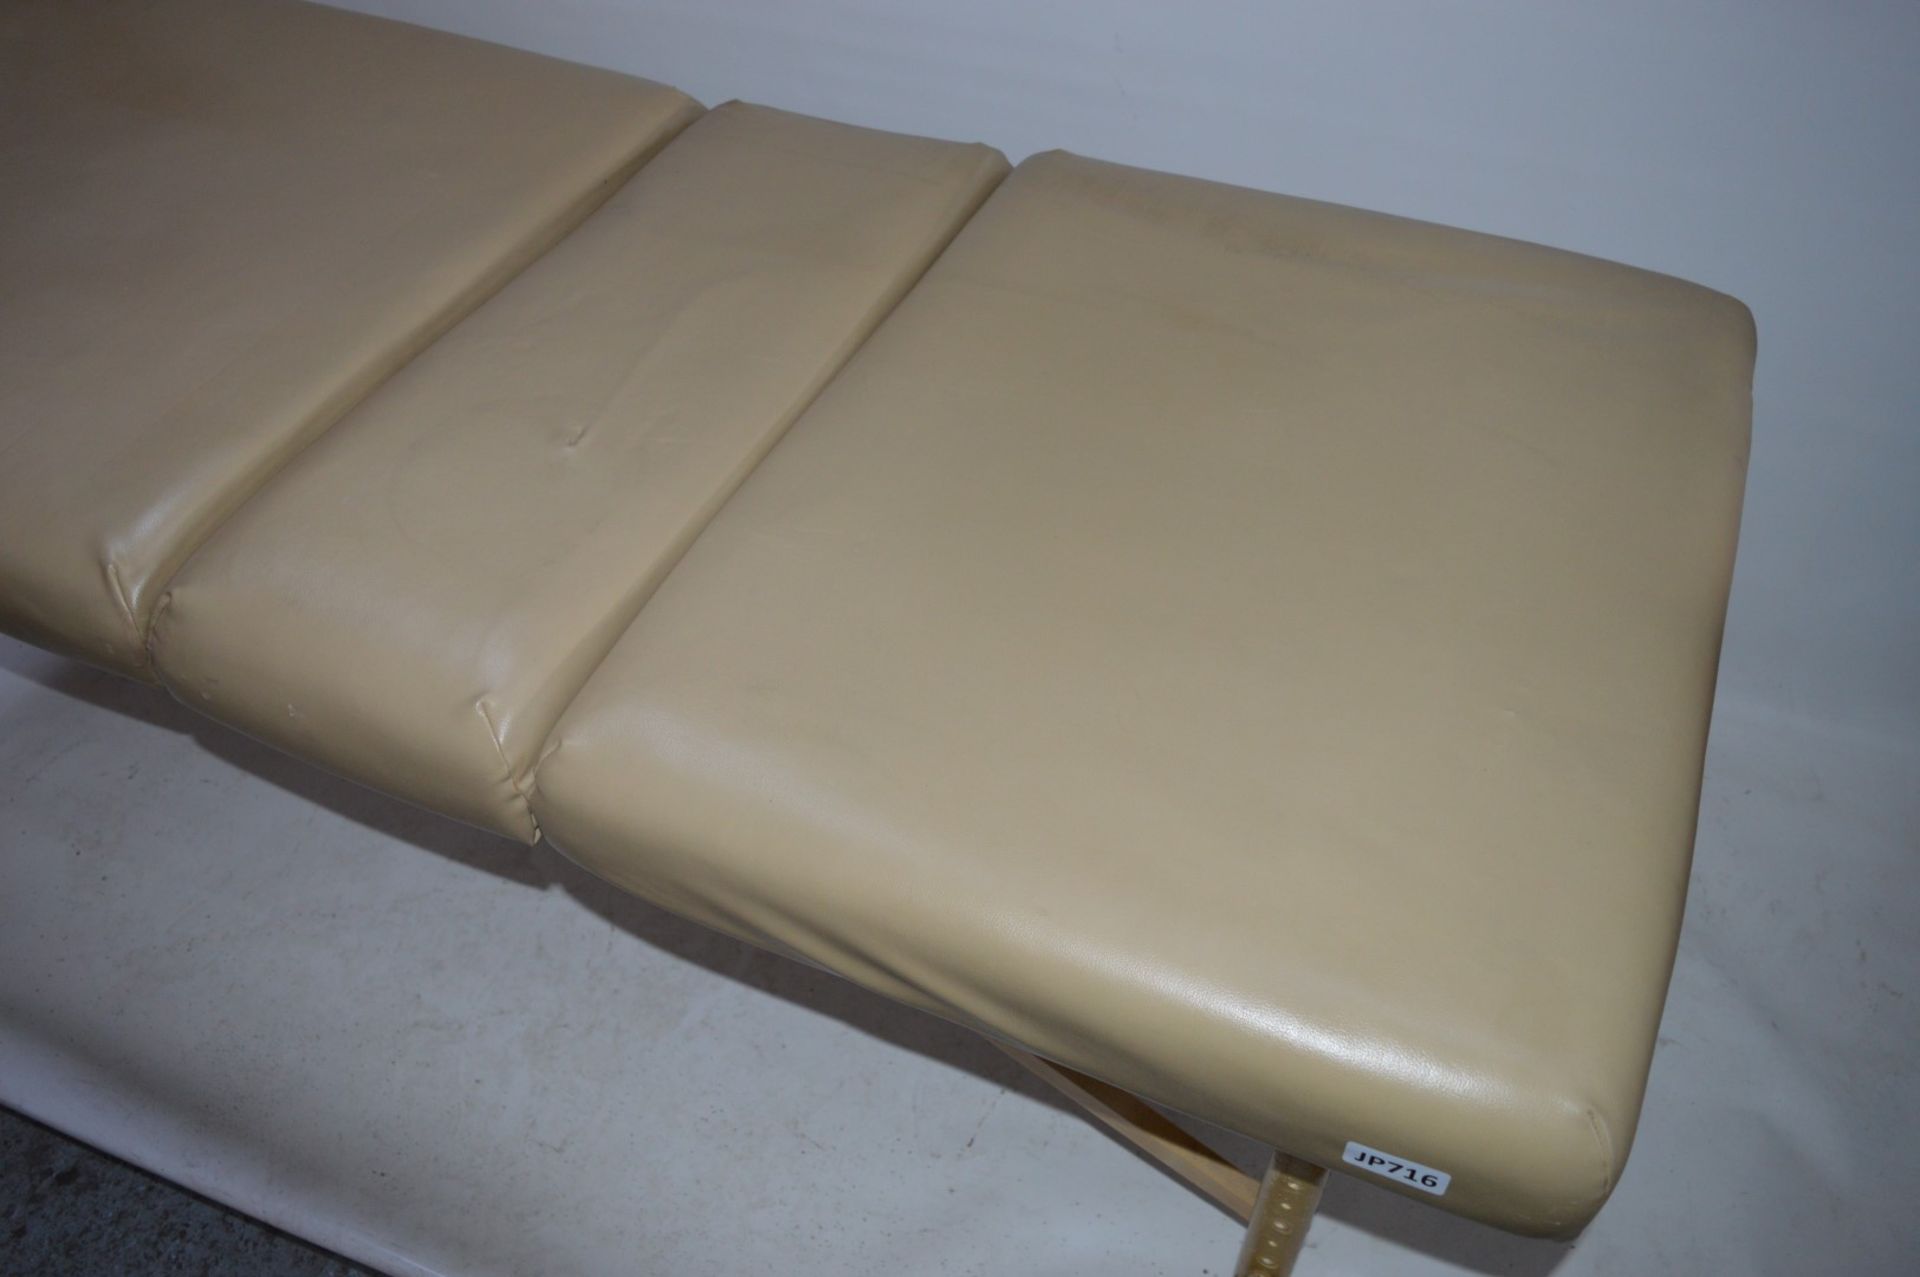 1 x Master Chicago Massage Table - Fold Up Massage Table Suitable For Home or Business Use - Very - Image 3 of 5